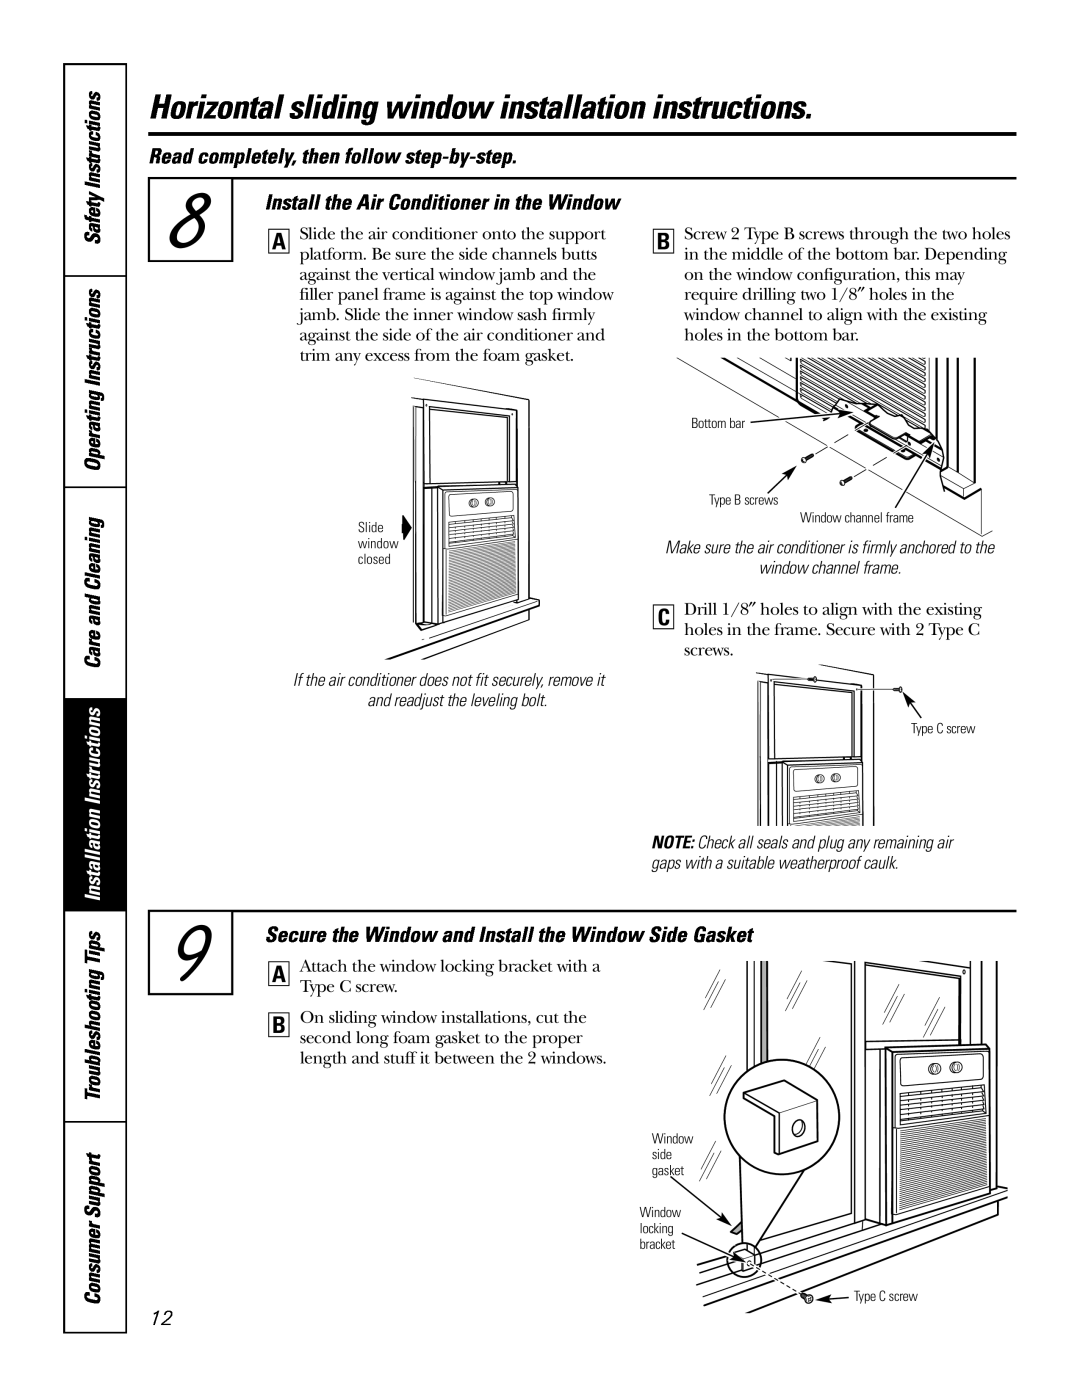 GE AGX08, AGX10 Instructions, Read completely, then follow step-by-step, Install the Air Conditioner in the Window 